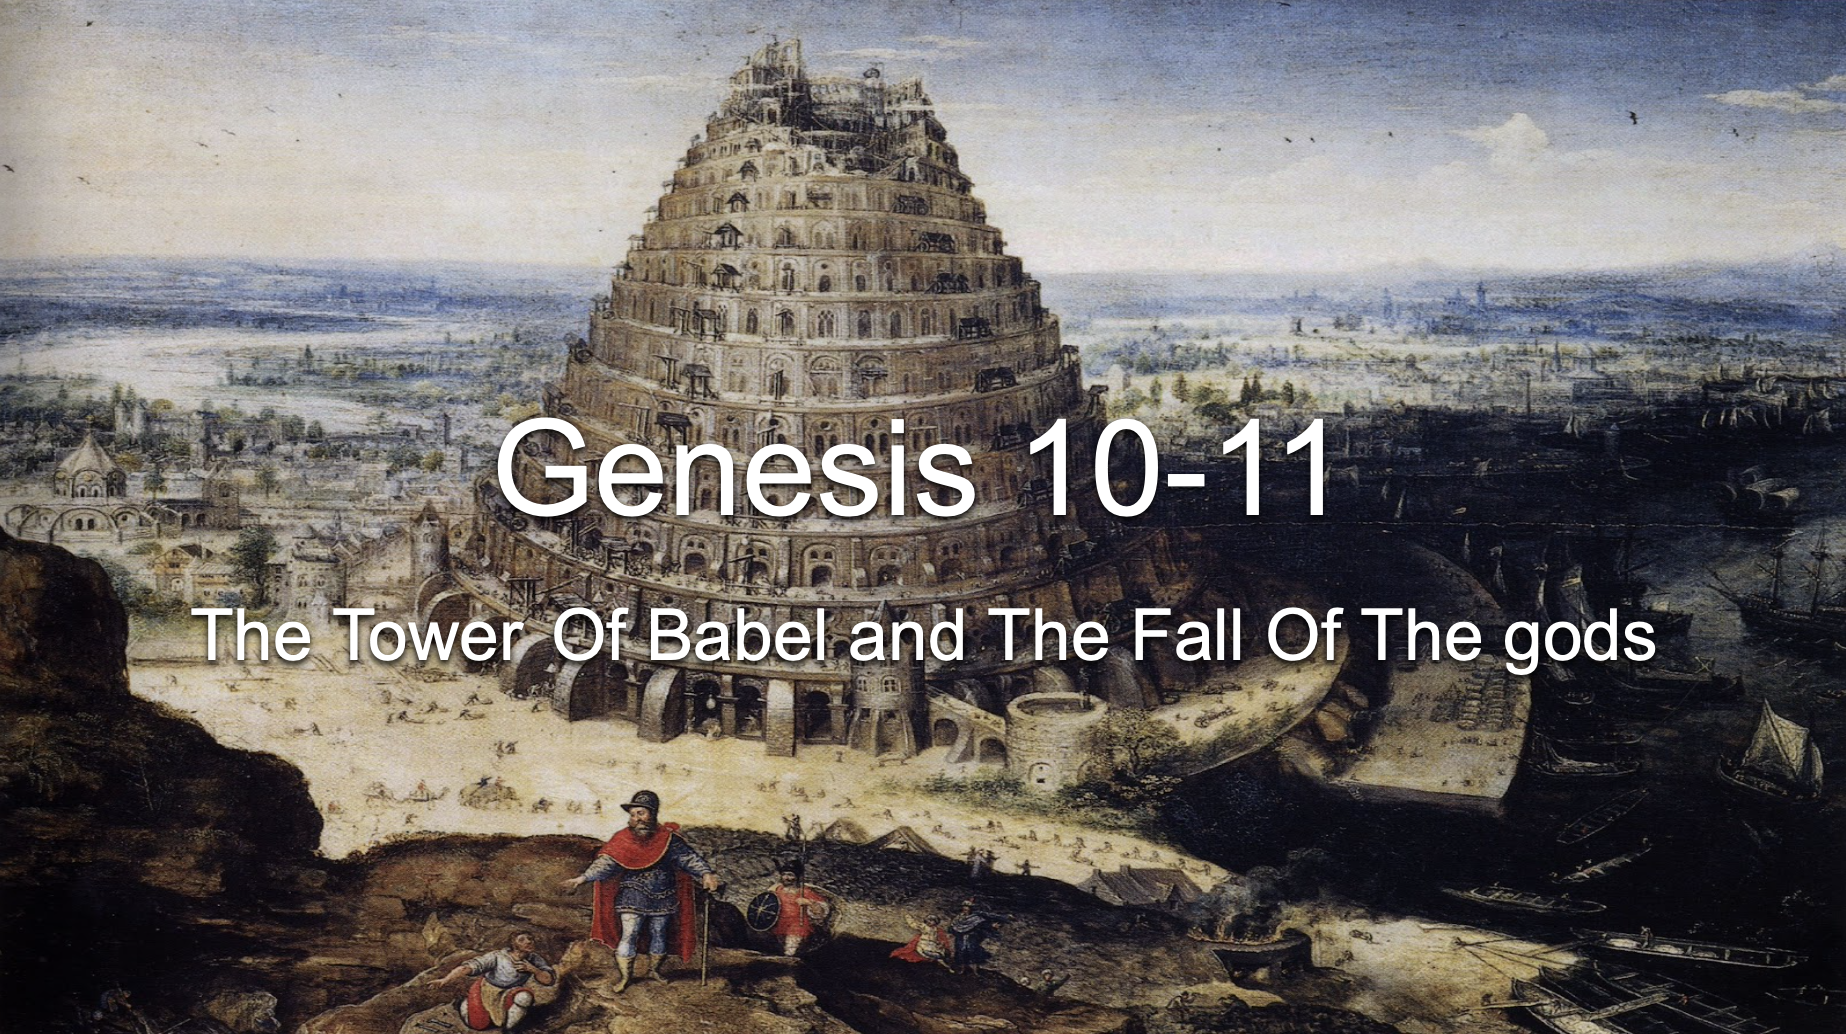 Genesis 10-11: The Tower Of Babel and The Fall Of The gods